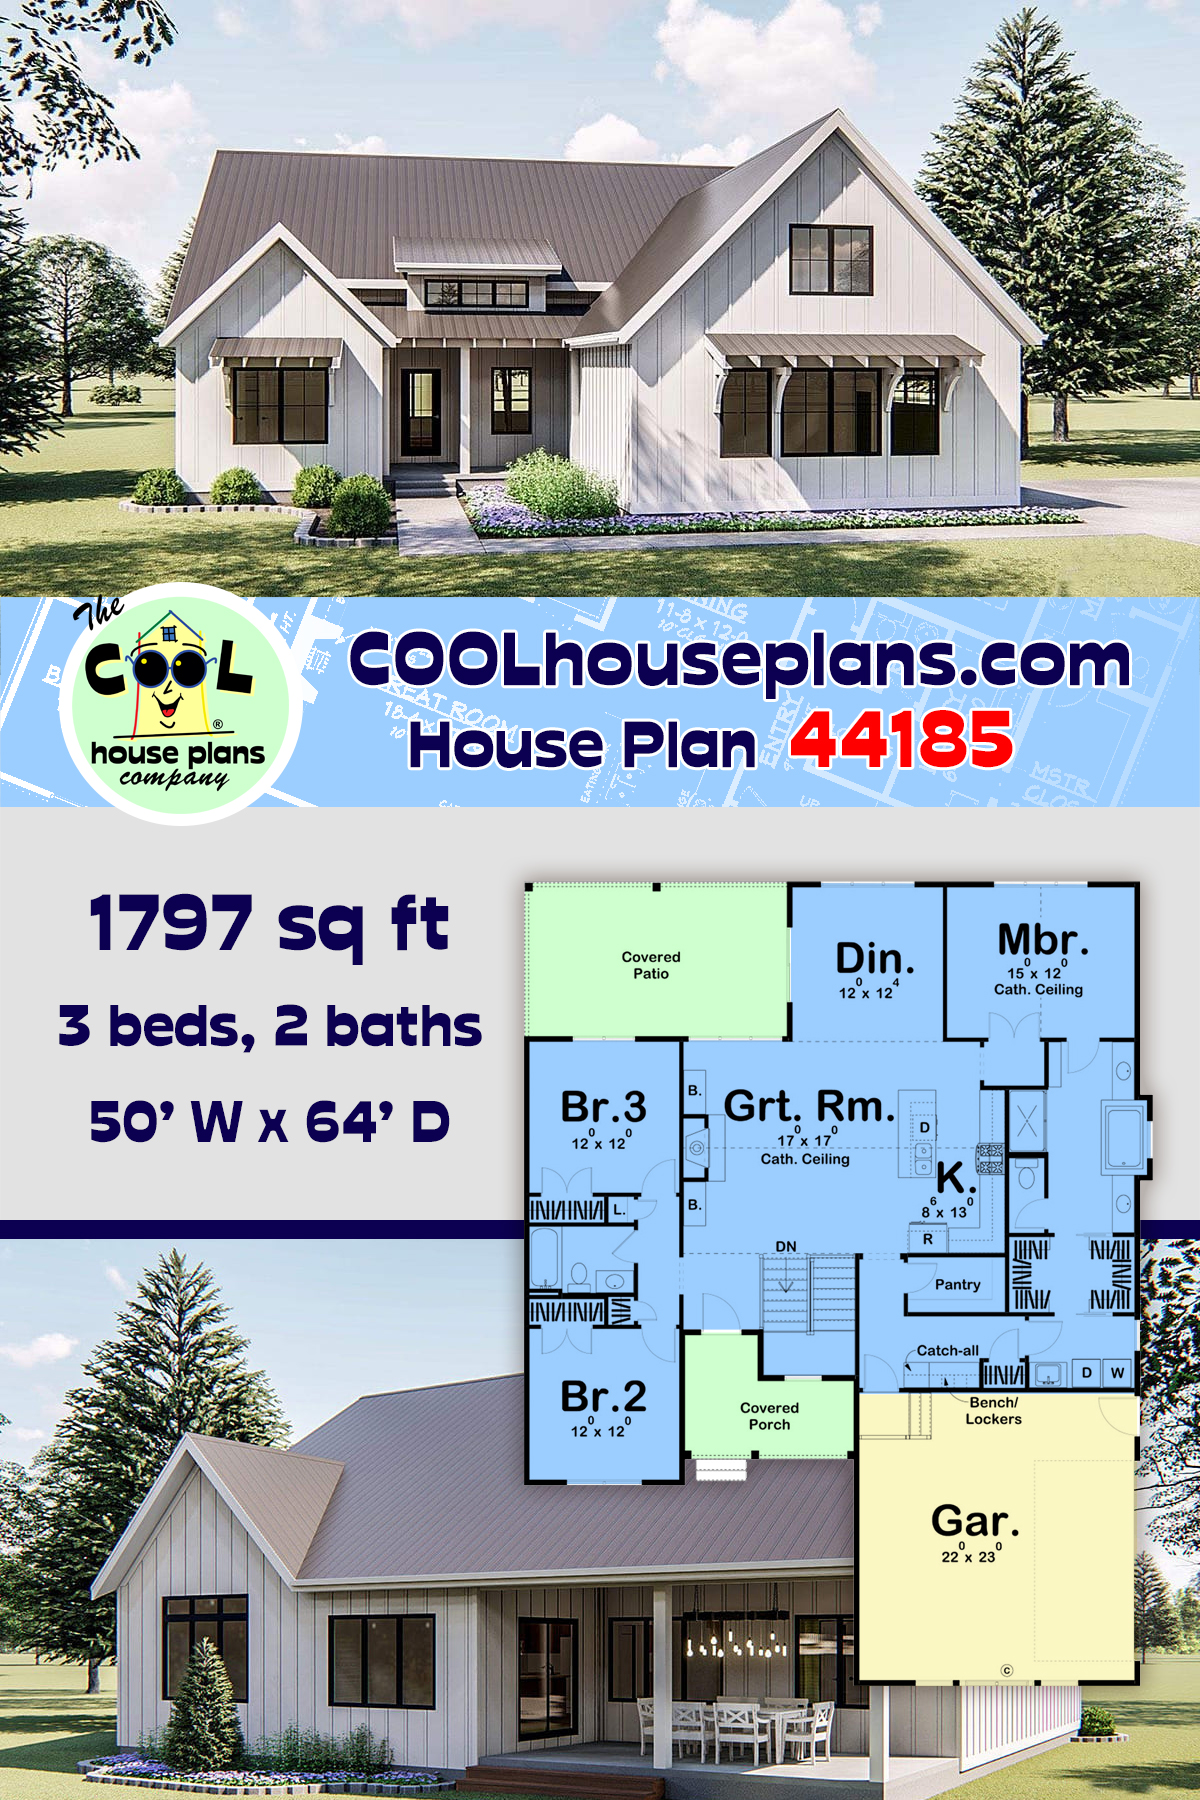 Country, Farmhouse, Southern, Traditional House Plan 44185 with 3 Beds, 2 Baths, 2 Car Garage